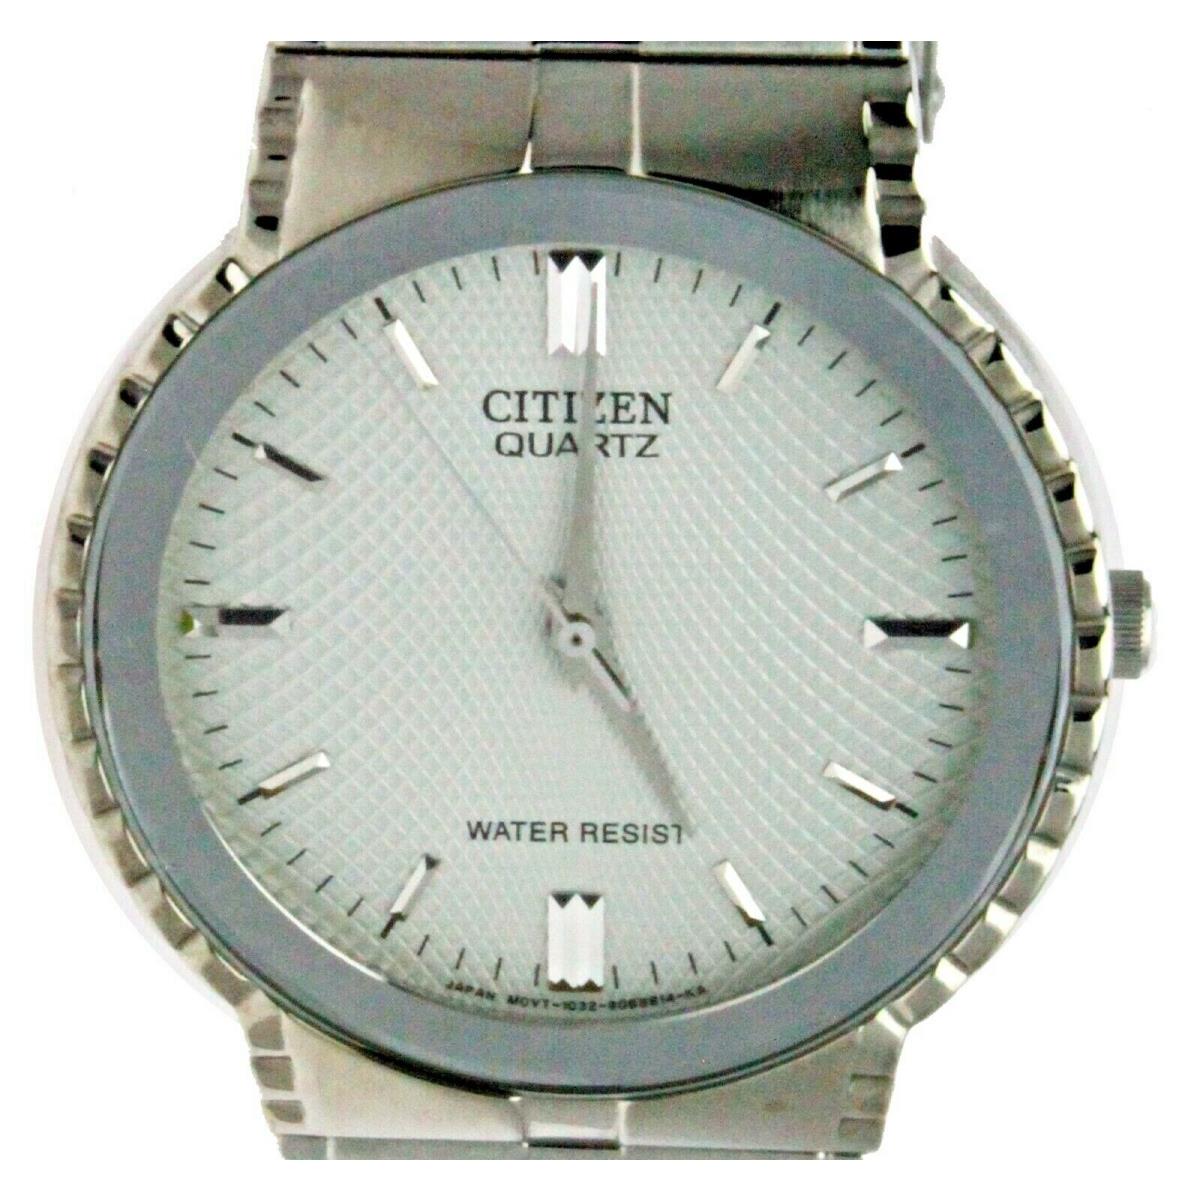 Citizen watch Vintage - White Dial, Gold Band 1